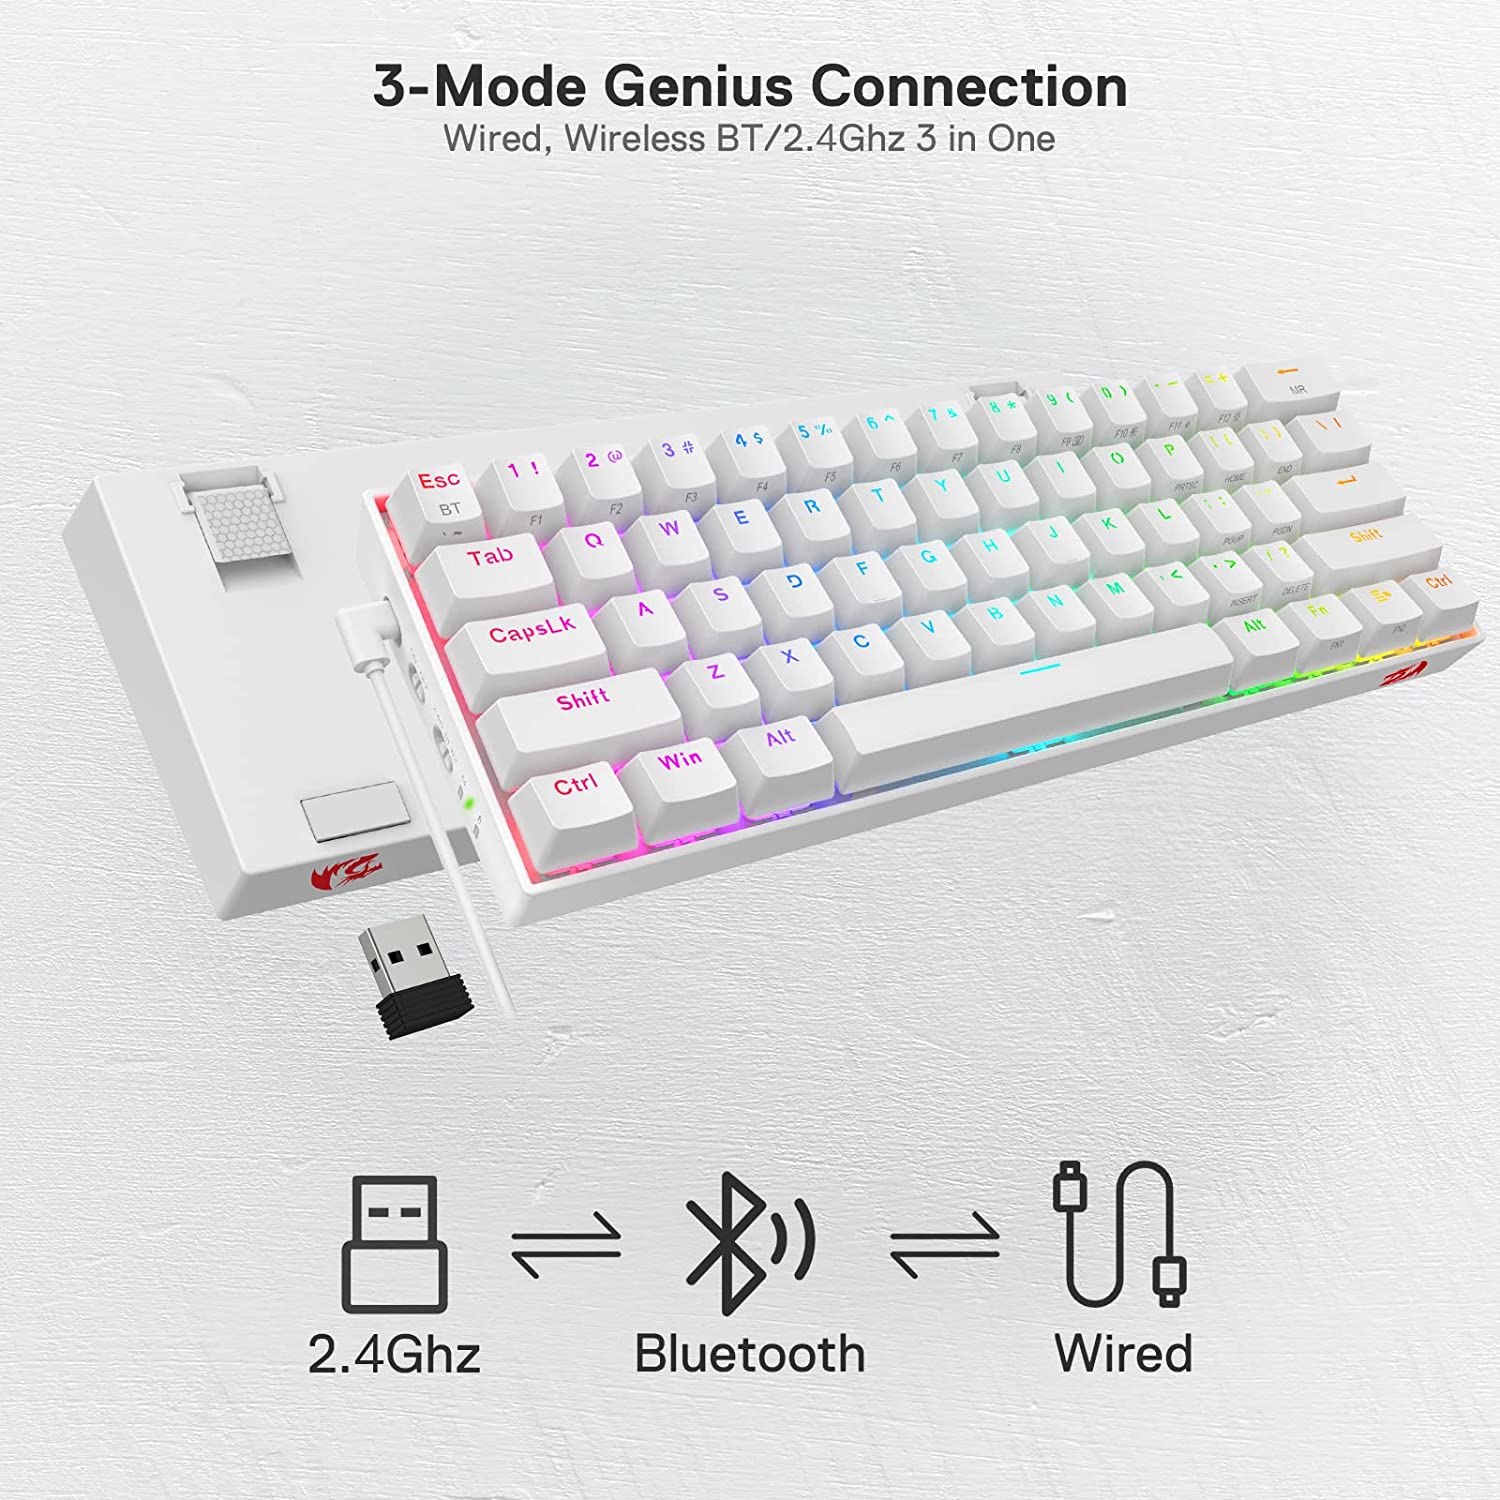 Redragon Draconic Pro K530 Pro - 60% Bluetooth+2.4Ghz+Wired Mechanical Keyboard White (Red Switch)